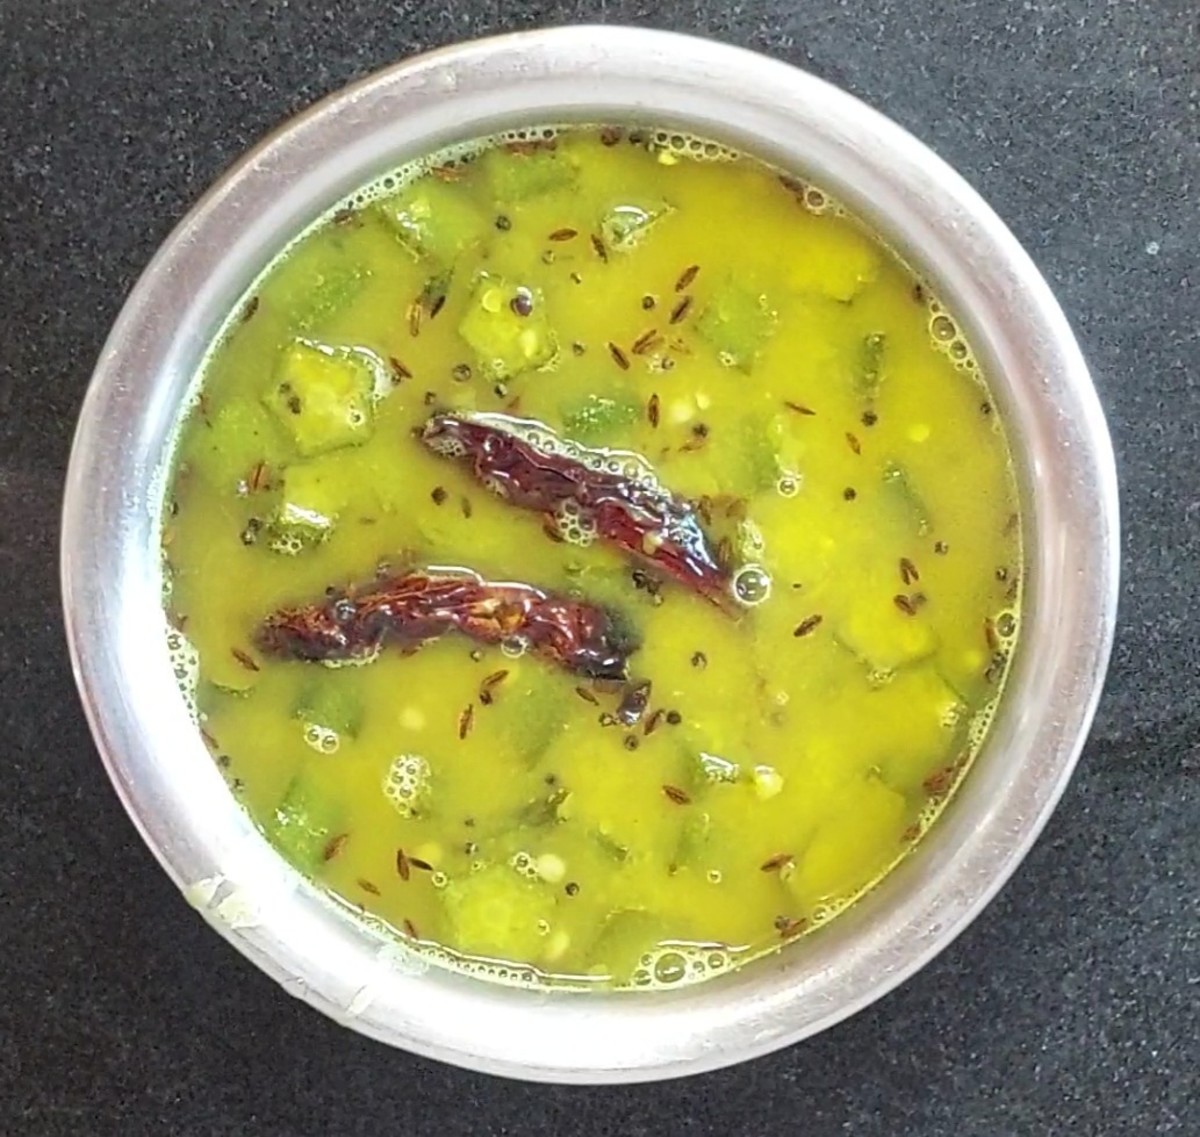 Tasty and flavorful ladies finger dal is ready to serve. Serve hot with rice or dosa and enjoy.